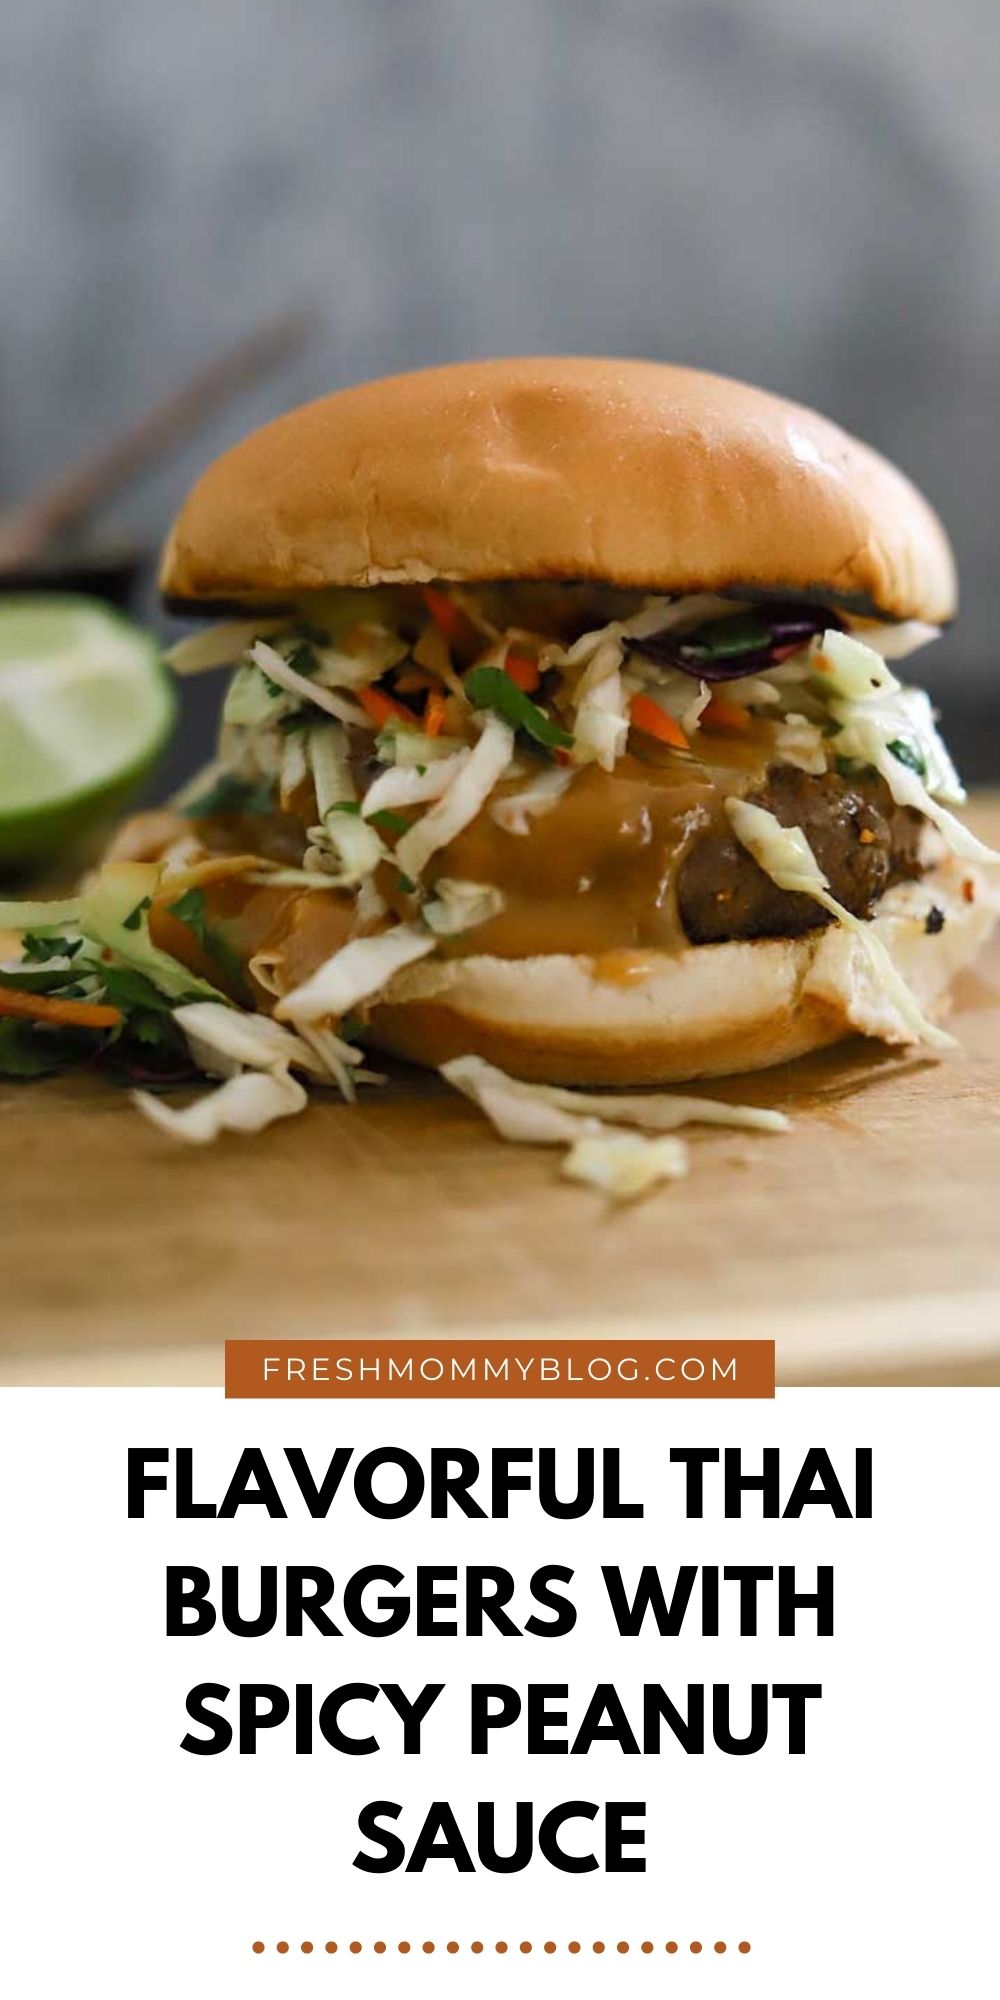 Thai Burgers With Peanut Sauce and 5 Barbeque Side Ideas for delicious family BBQ dinner ideas from top Florida lifestyle and food blogger Tabitha Blue of Fresh Mommy Blog | Thai Burgers by popular Florida lifestyle blog, Fresh Mommy Blog: image of a Thai burger on a wooden serving board. 